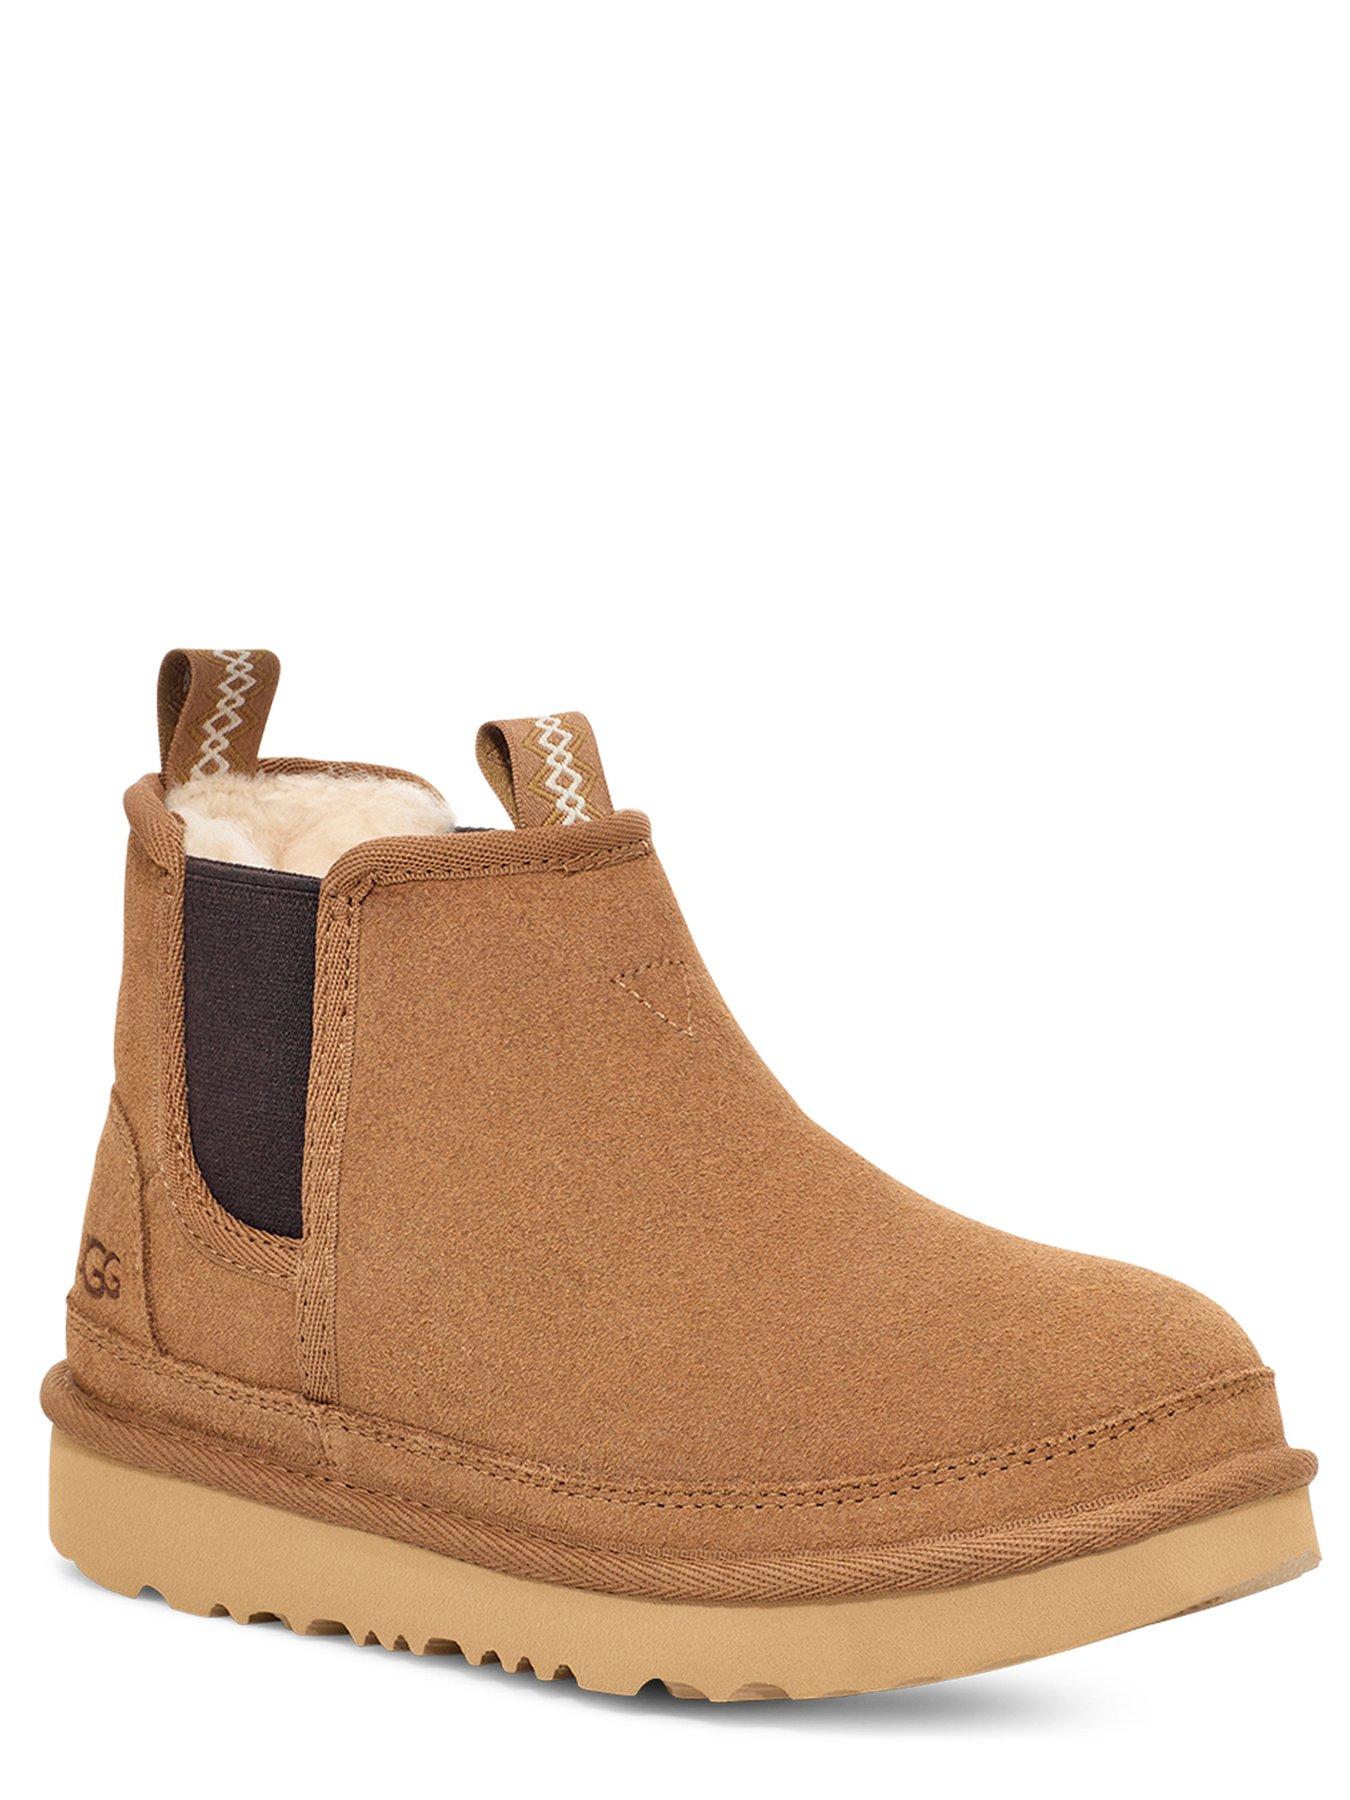 UGG Kids Neumel Chelsea Classic Boot - Brown | Very.co.uk